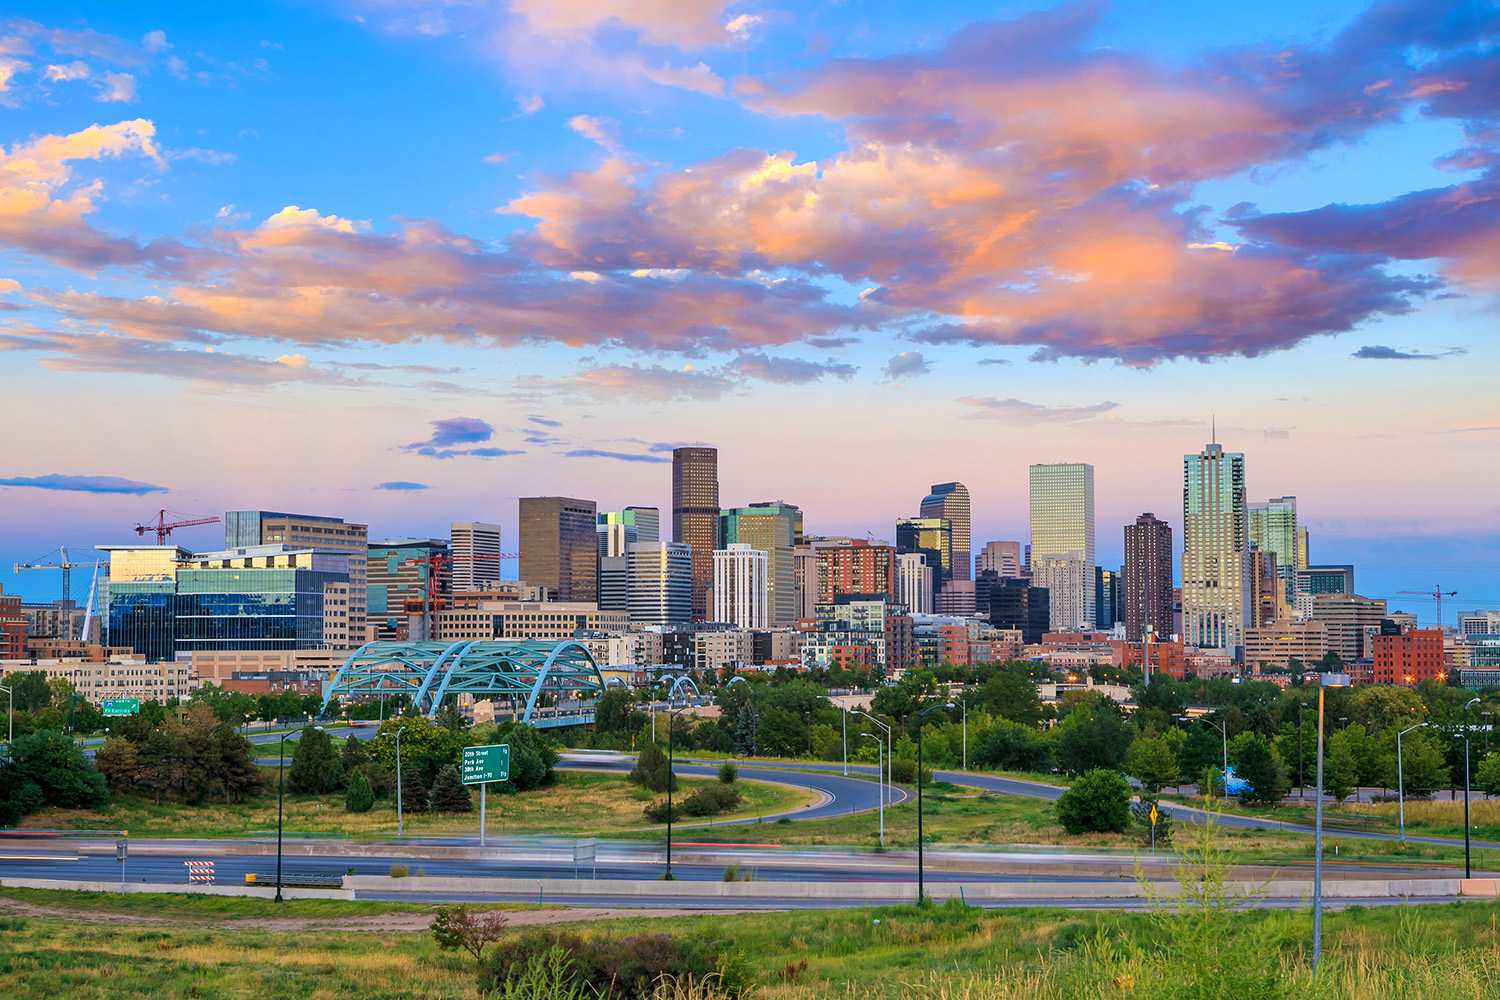 A Photograph of Denver with a Panoramic Skyline View including Sky and Clouds